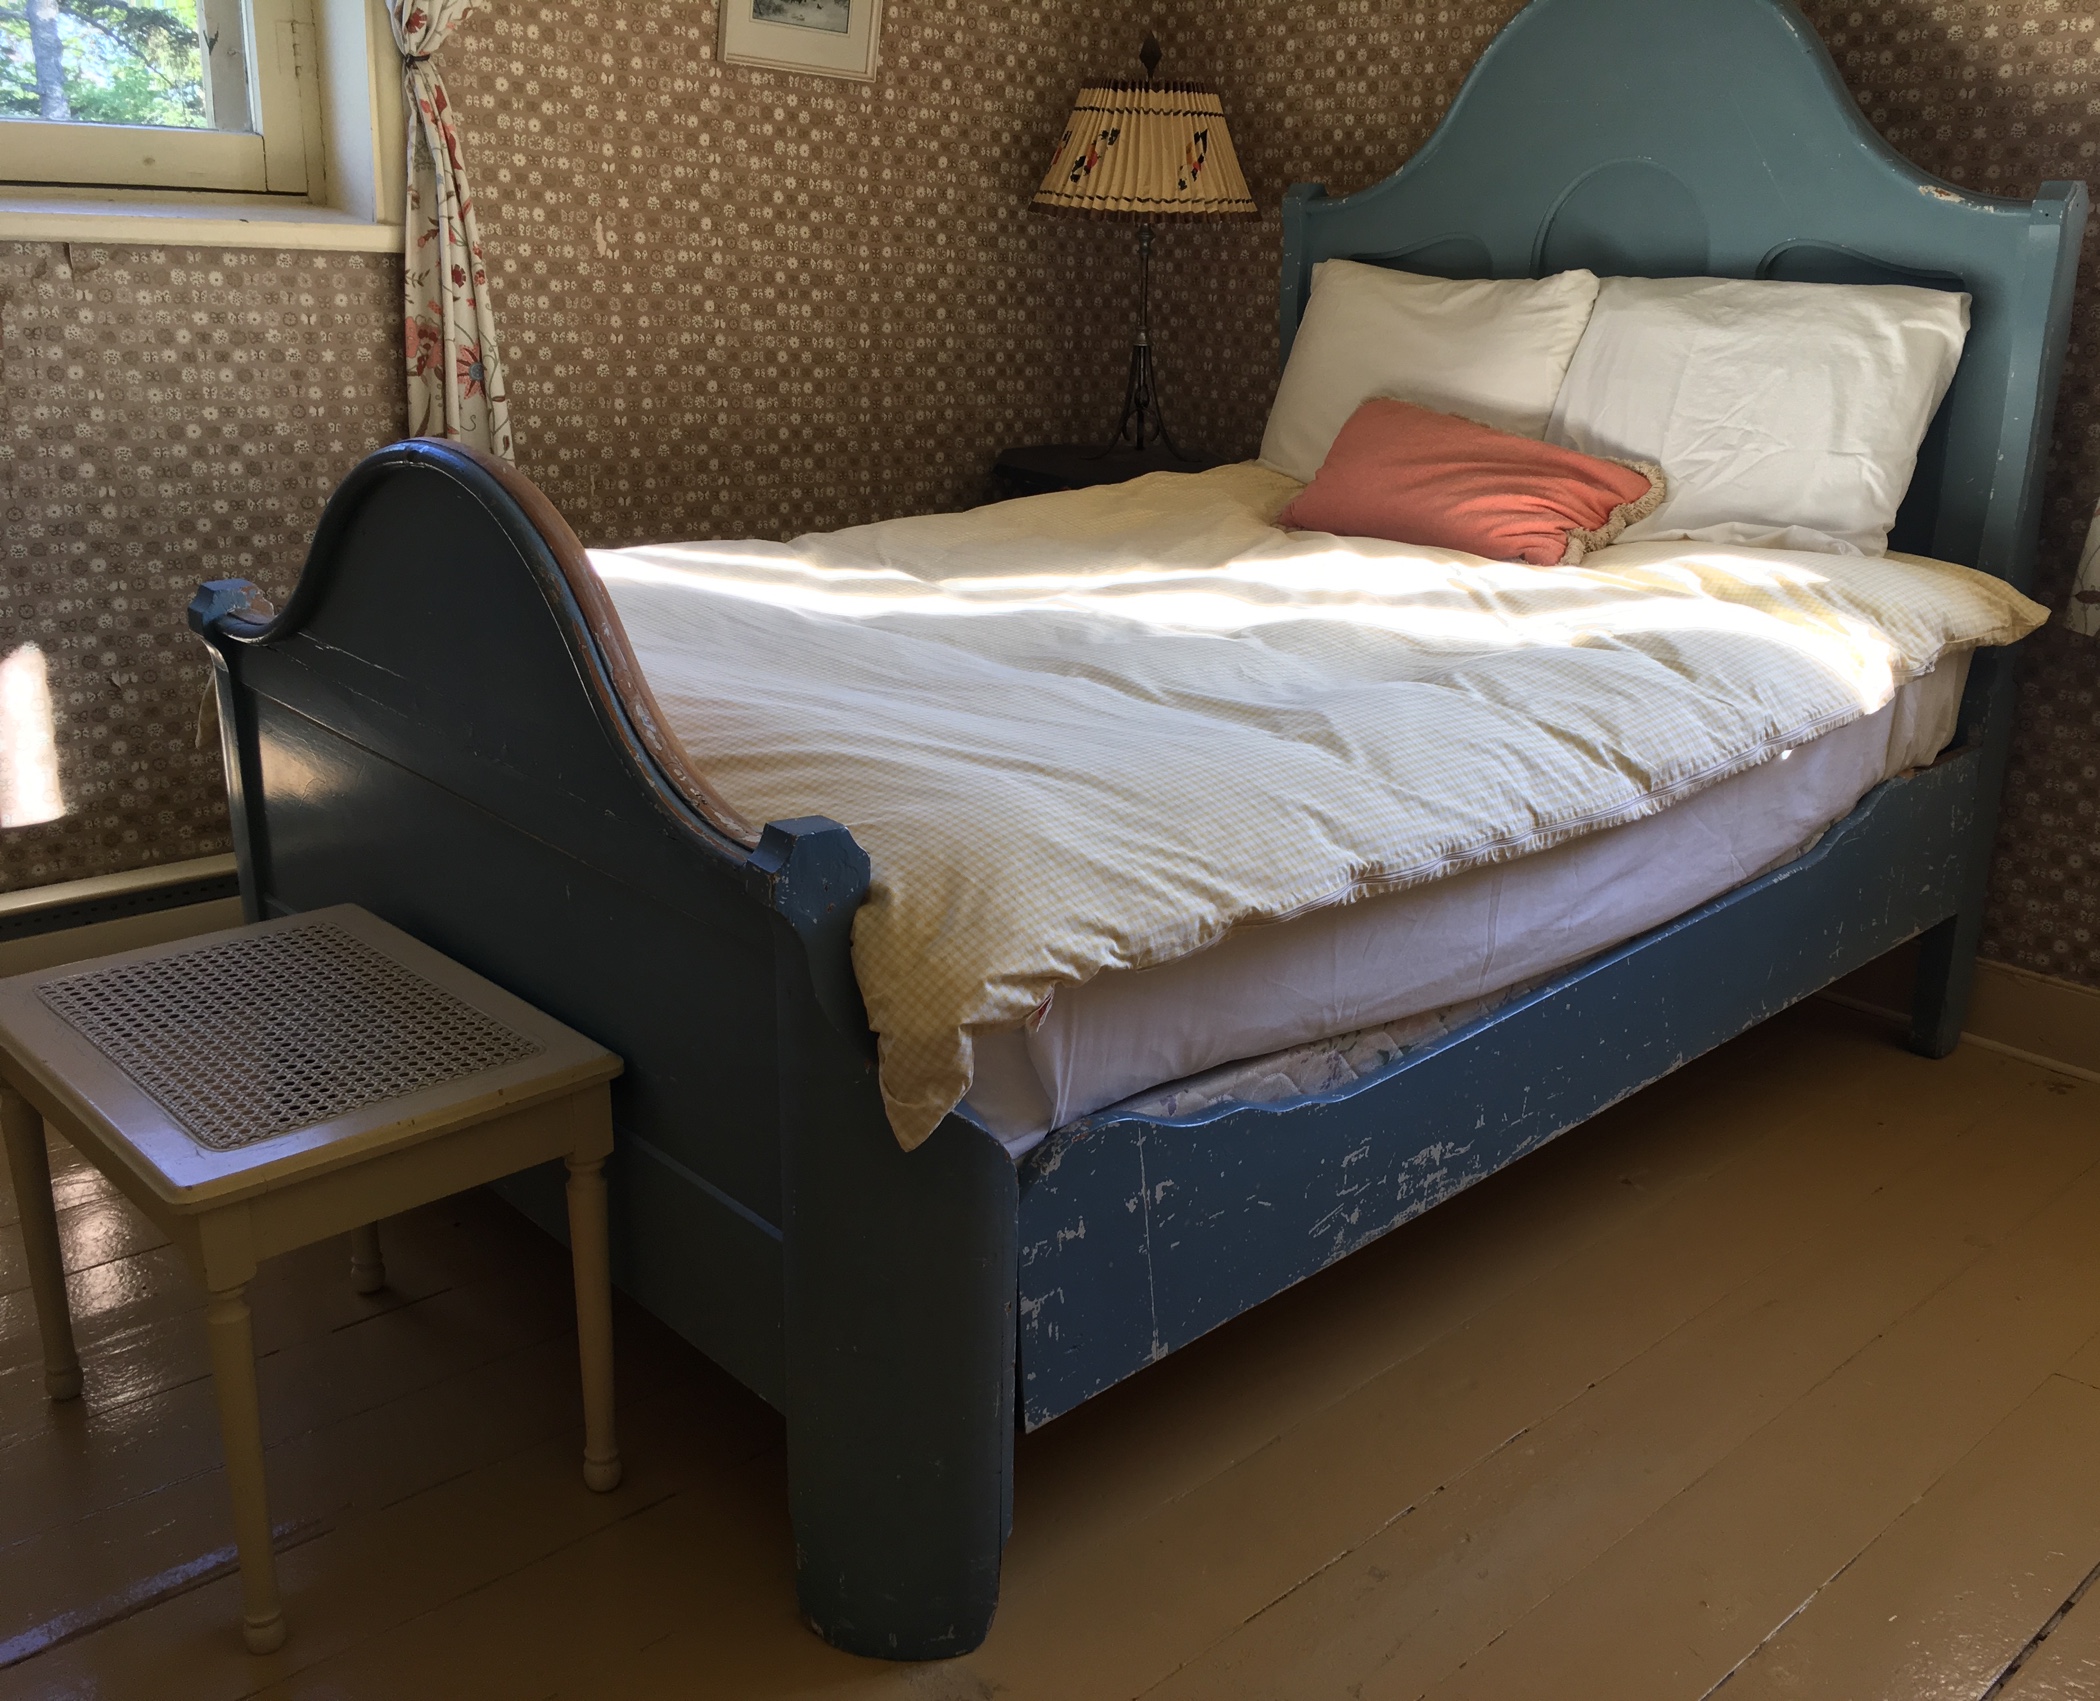 A colour photograph of Sir John A. Macdonald's bed, a wooden three-quarter size bed, featuring a tall headboard and smaller footboard, with scuffed blue paint especially along the sideboards.